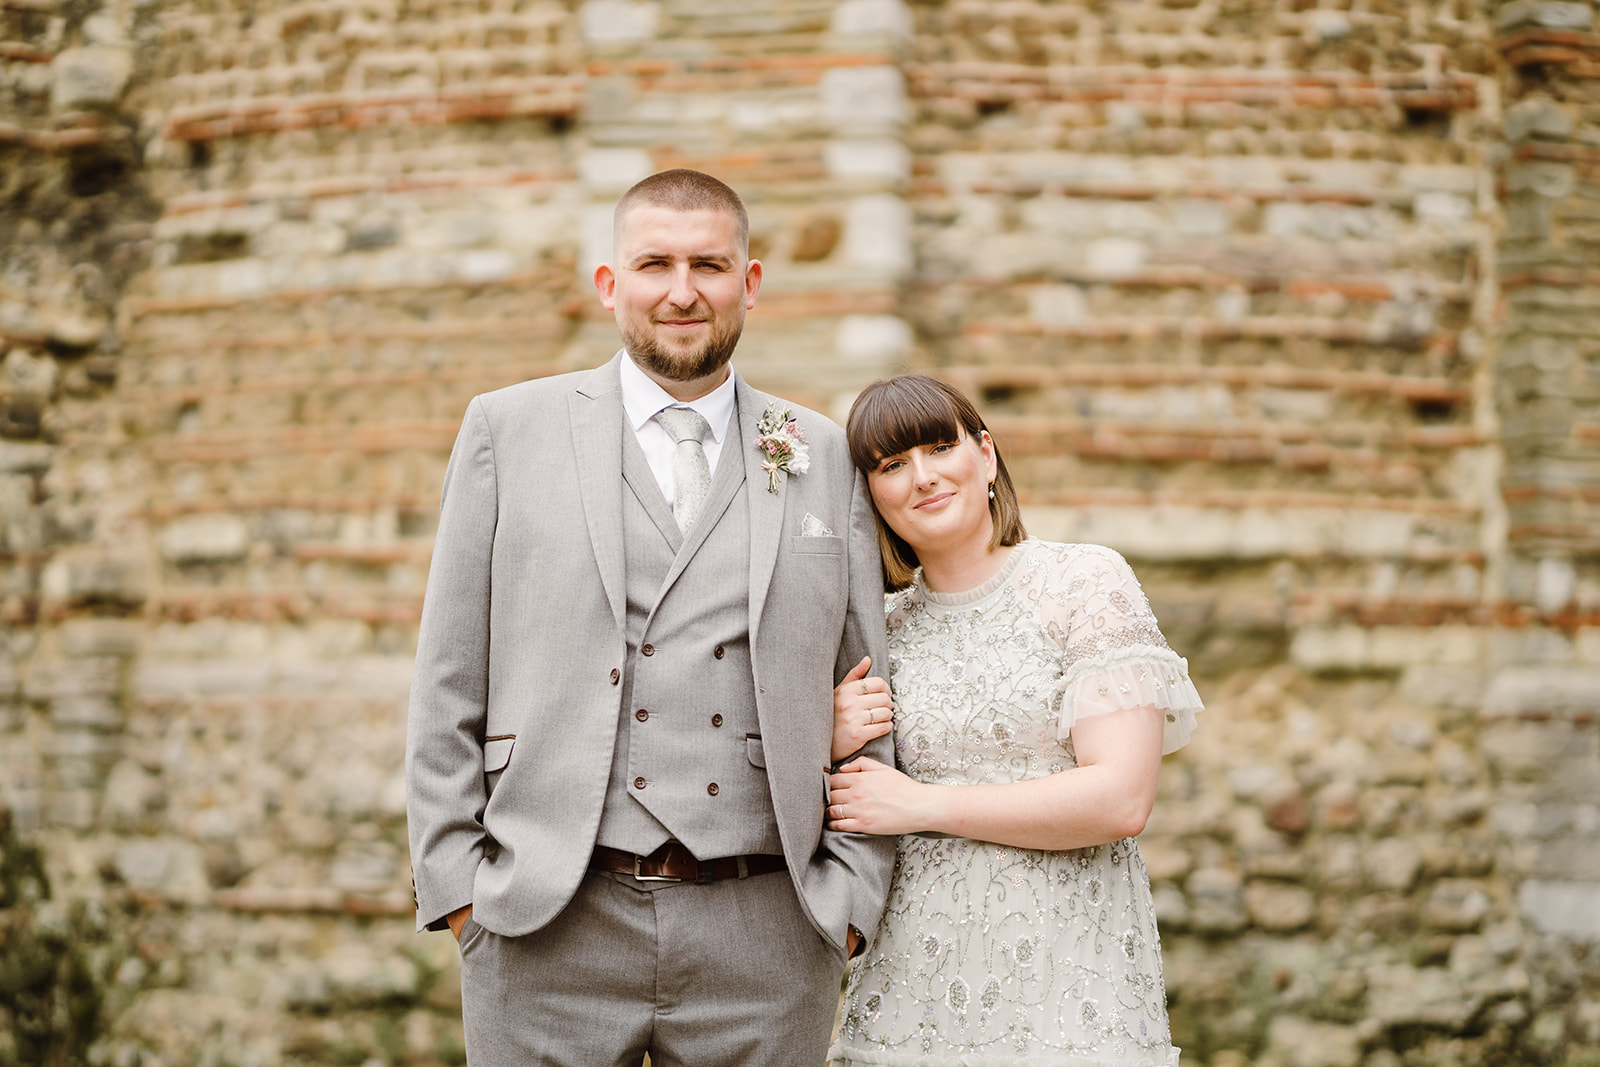 Intimate elopement in historic Colchester